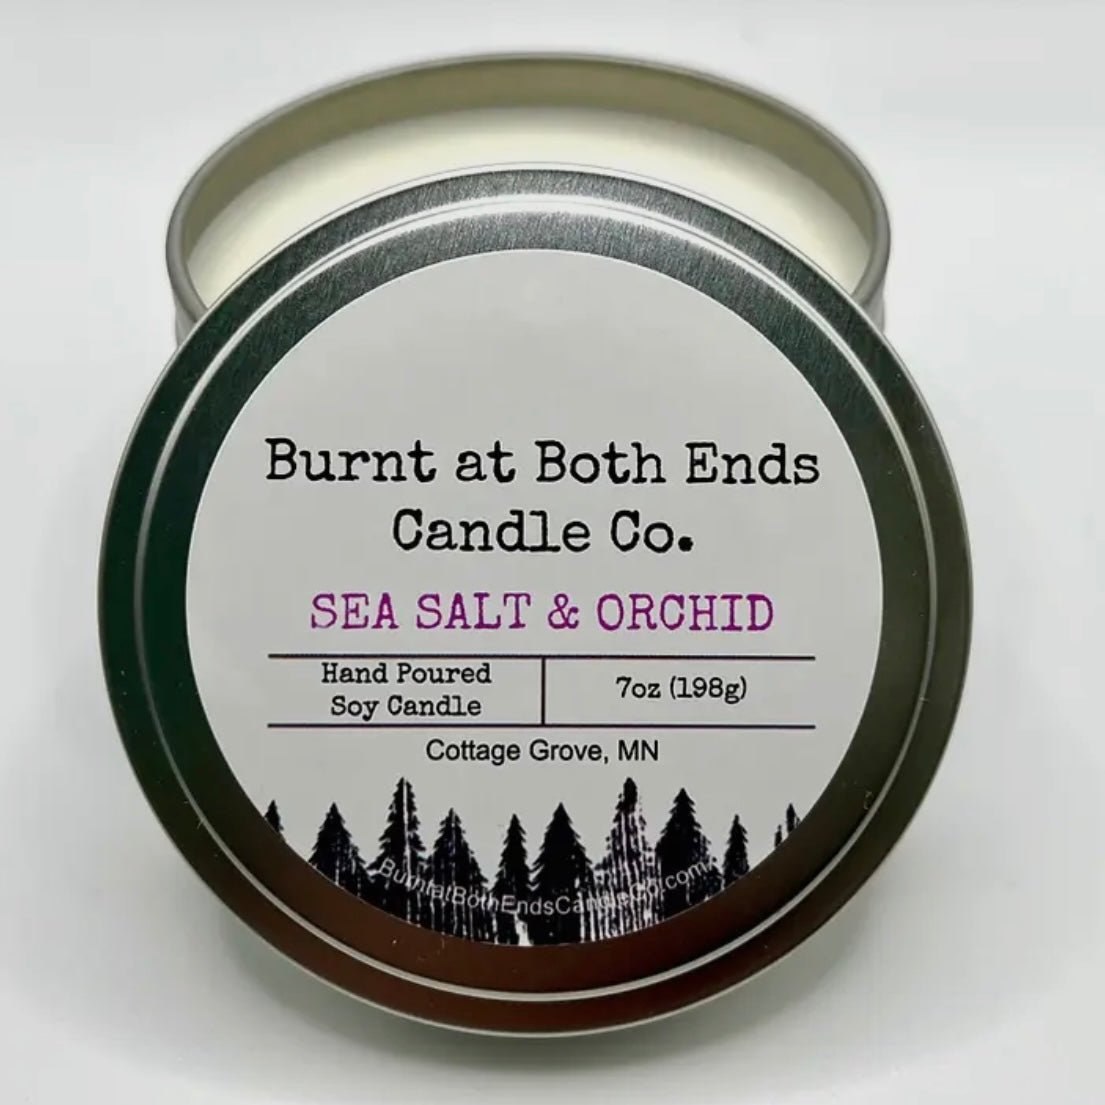 Burnt at Both Ends Candle - 7oz Tin - Sea Salt & Orchid